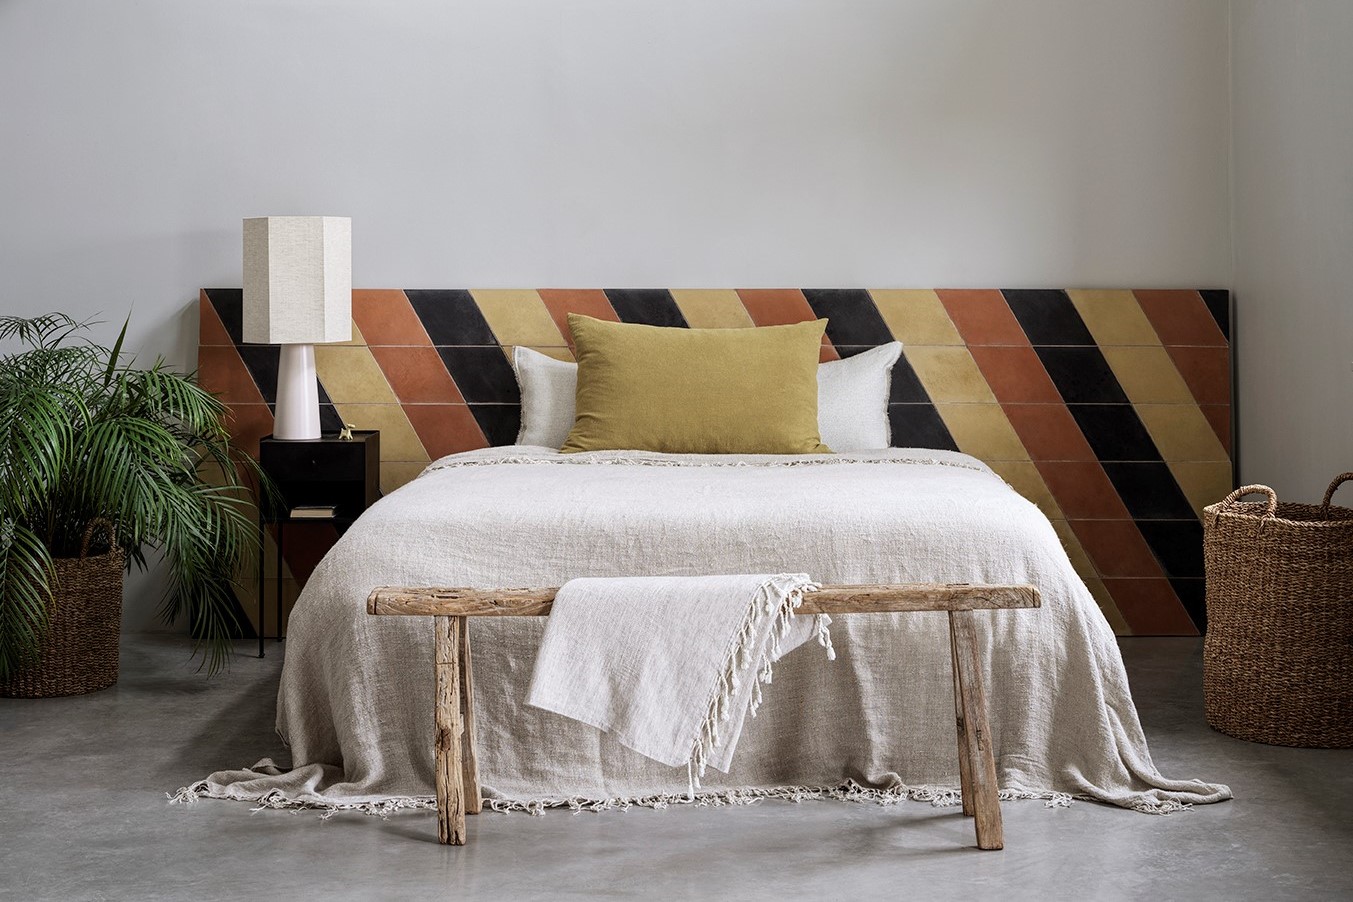 brown and black striped tile as headboard behind the bed. Bert & May encaustic tiles from Hyperion Tiles